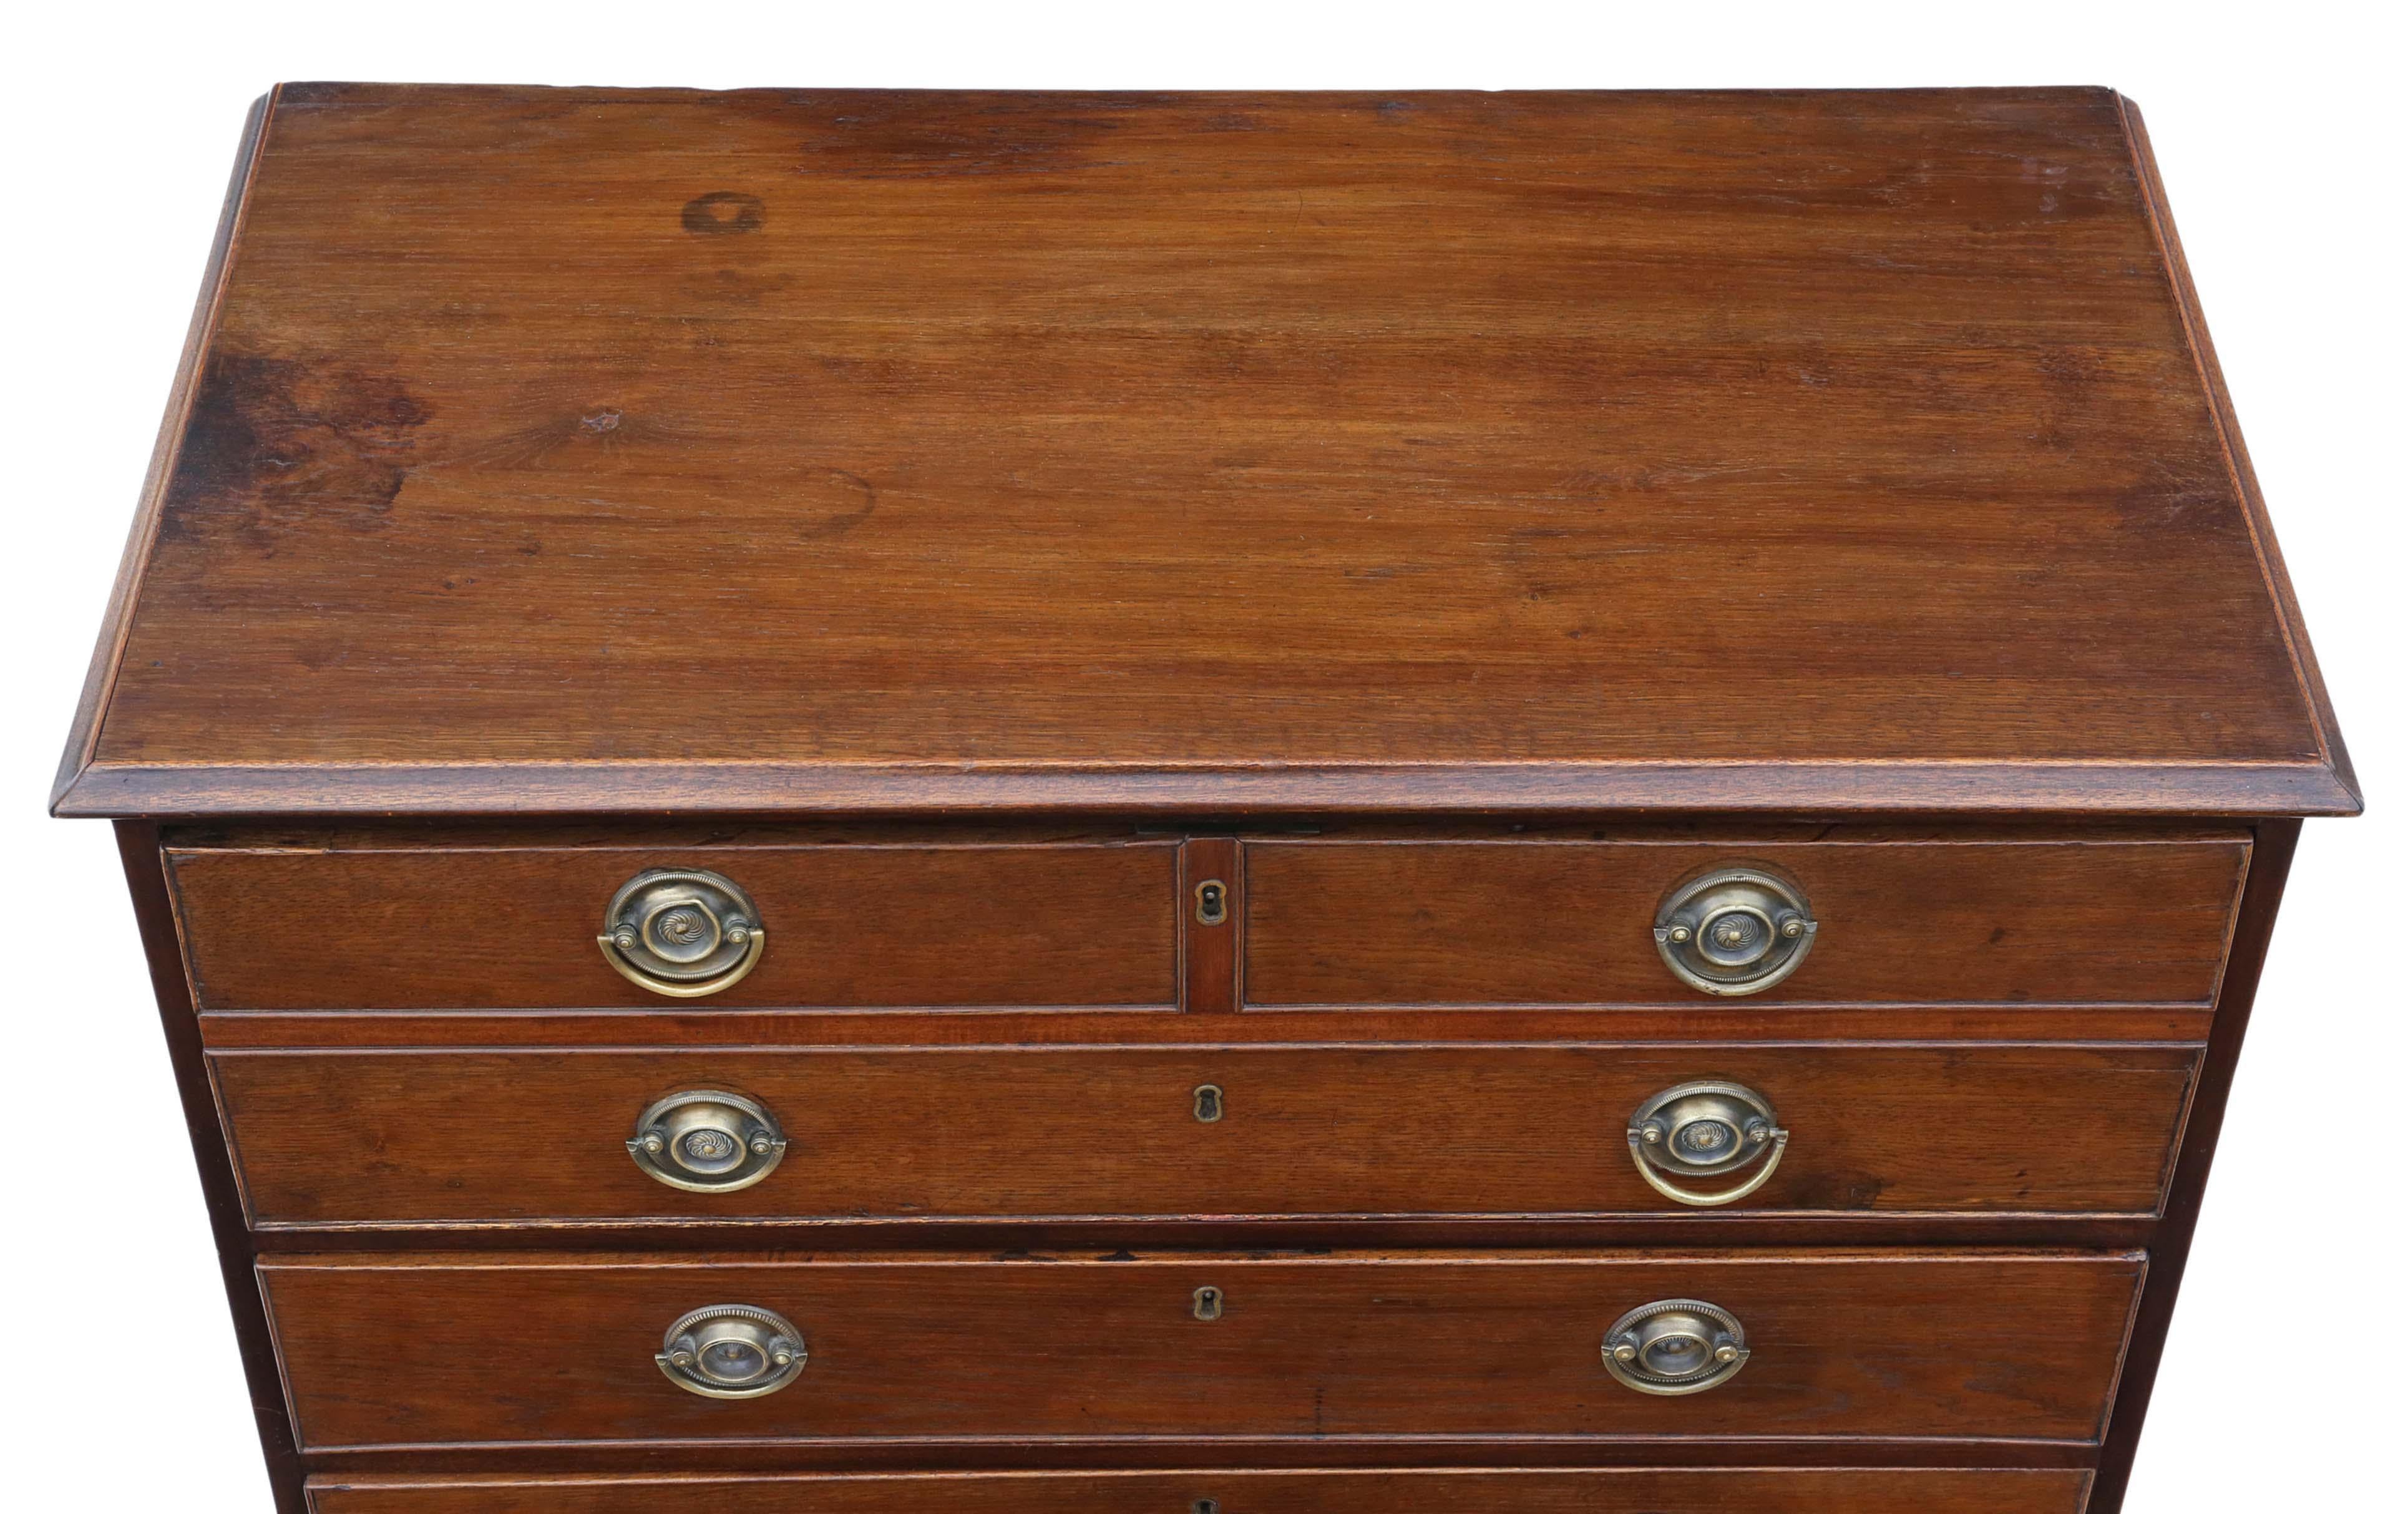 Antique Georgian / Regency elm secretaire desk writing chest of drawers circa 1800-1830.
A lovely item, that is full of age, charm and character. Old patinated leather skiver (not original).
Solid with no loose joints and the drawers slide